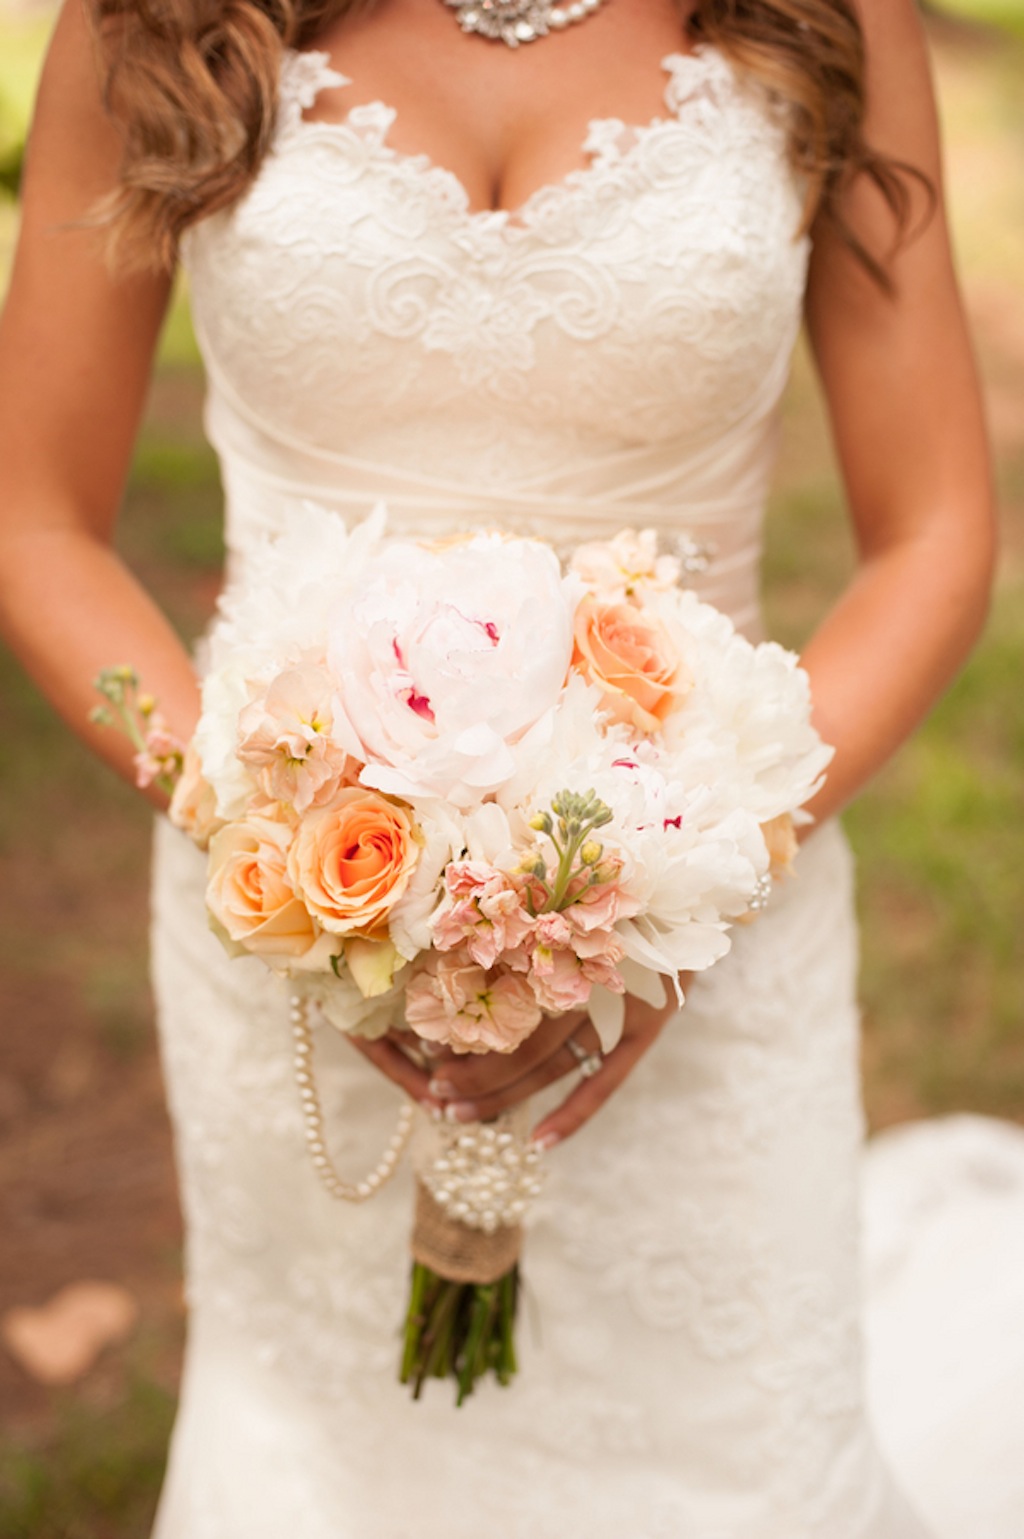 White Lace Wedding Dress with Peach, Pink Burlap and Pearls Wedding Bouquet